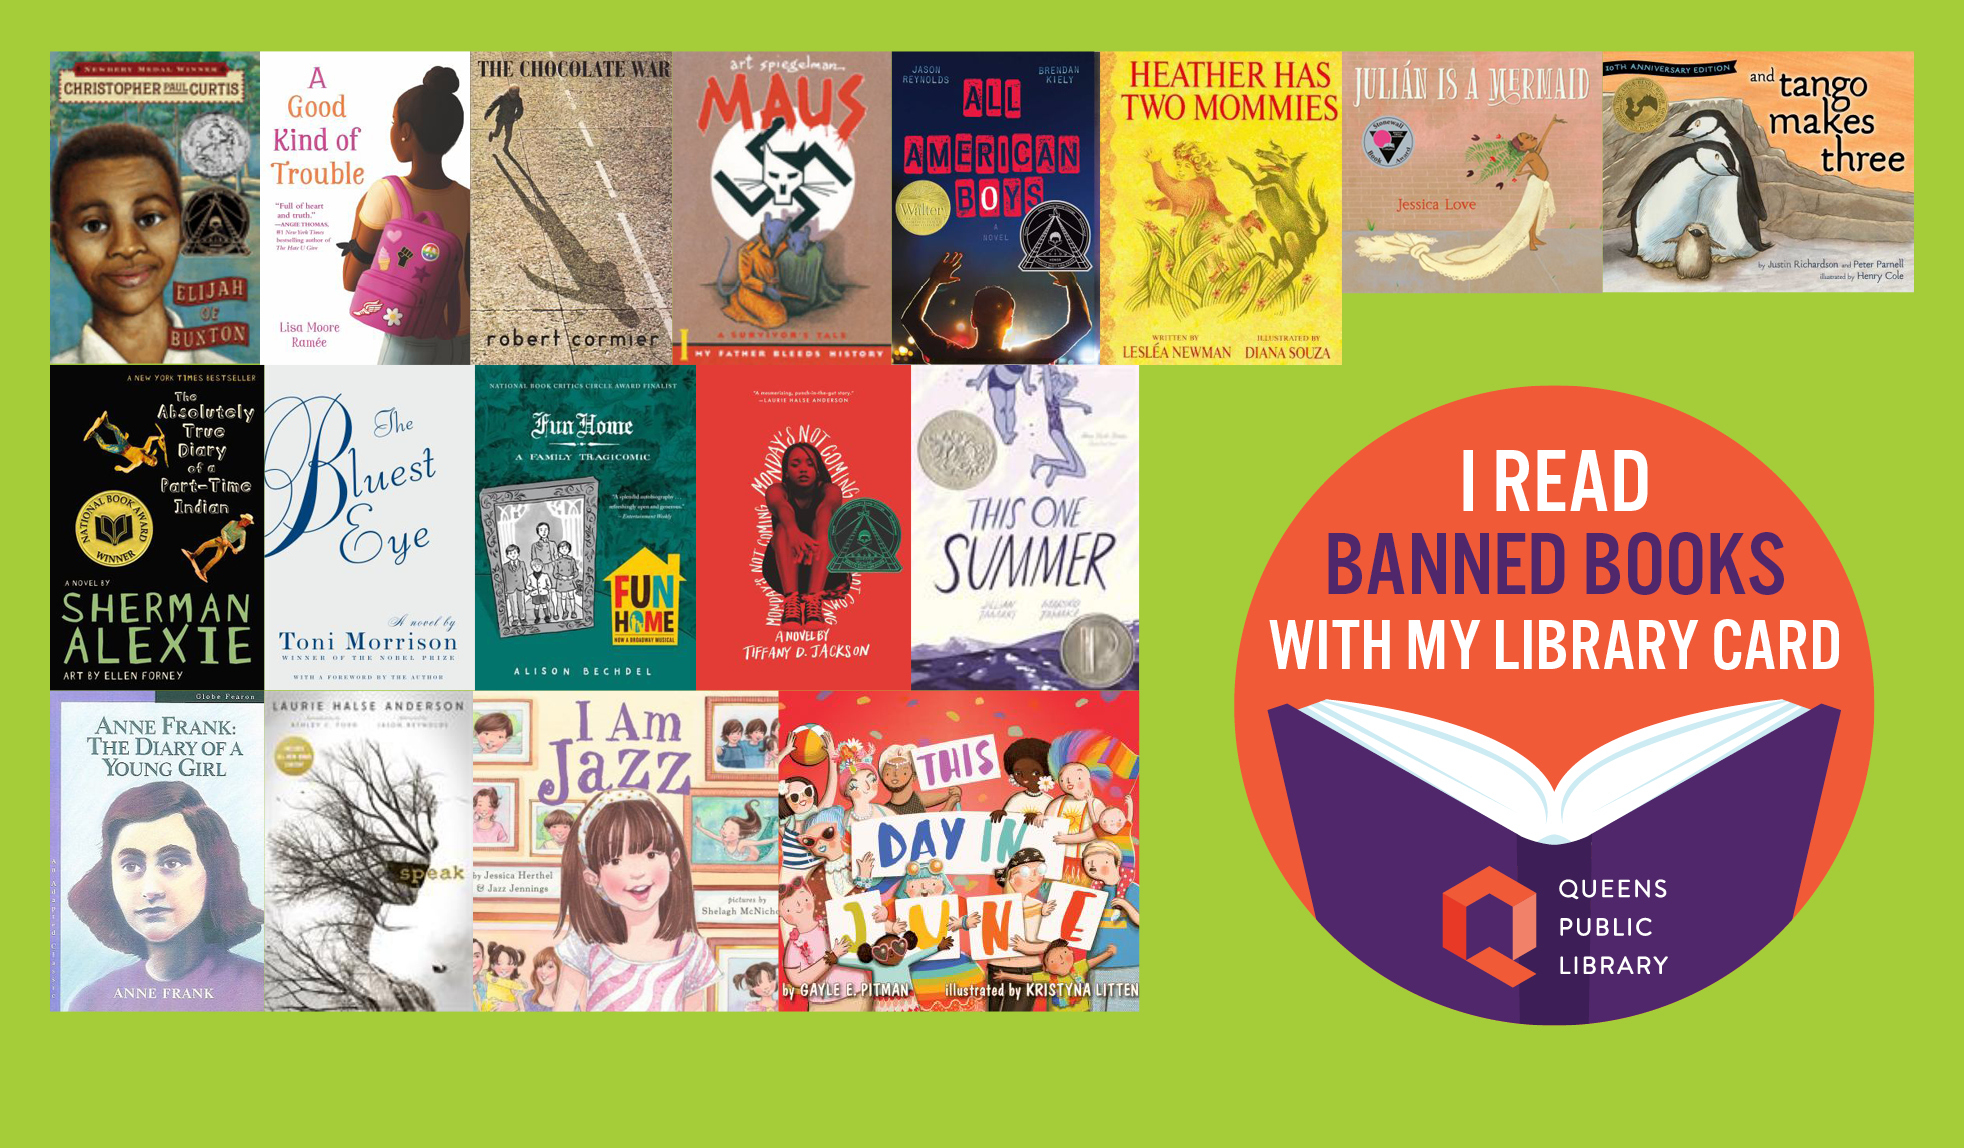 Get inspired and continue the fight against censorship with this list.